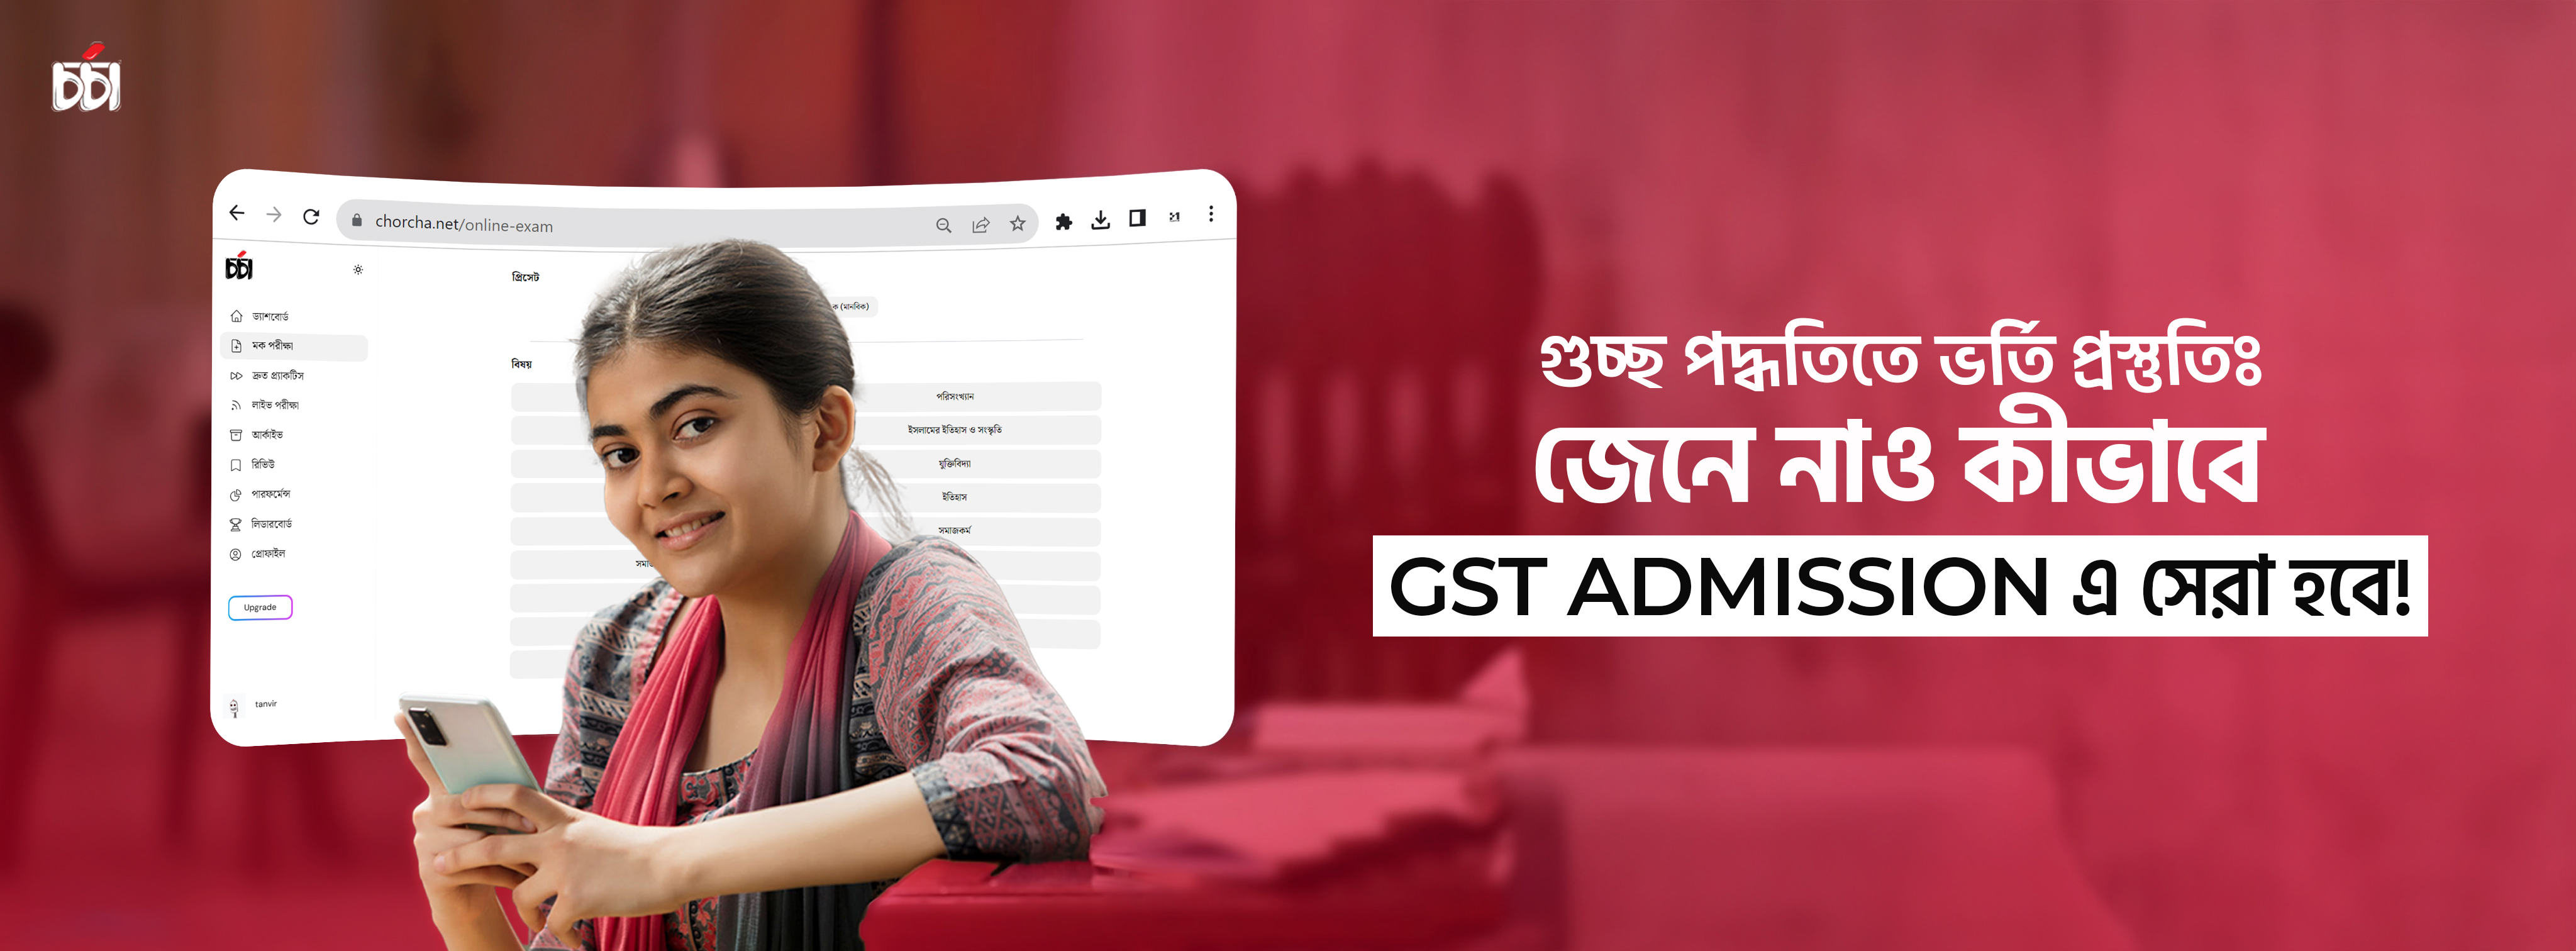 A girl preparing for GST Admission test 224